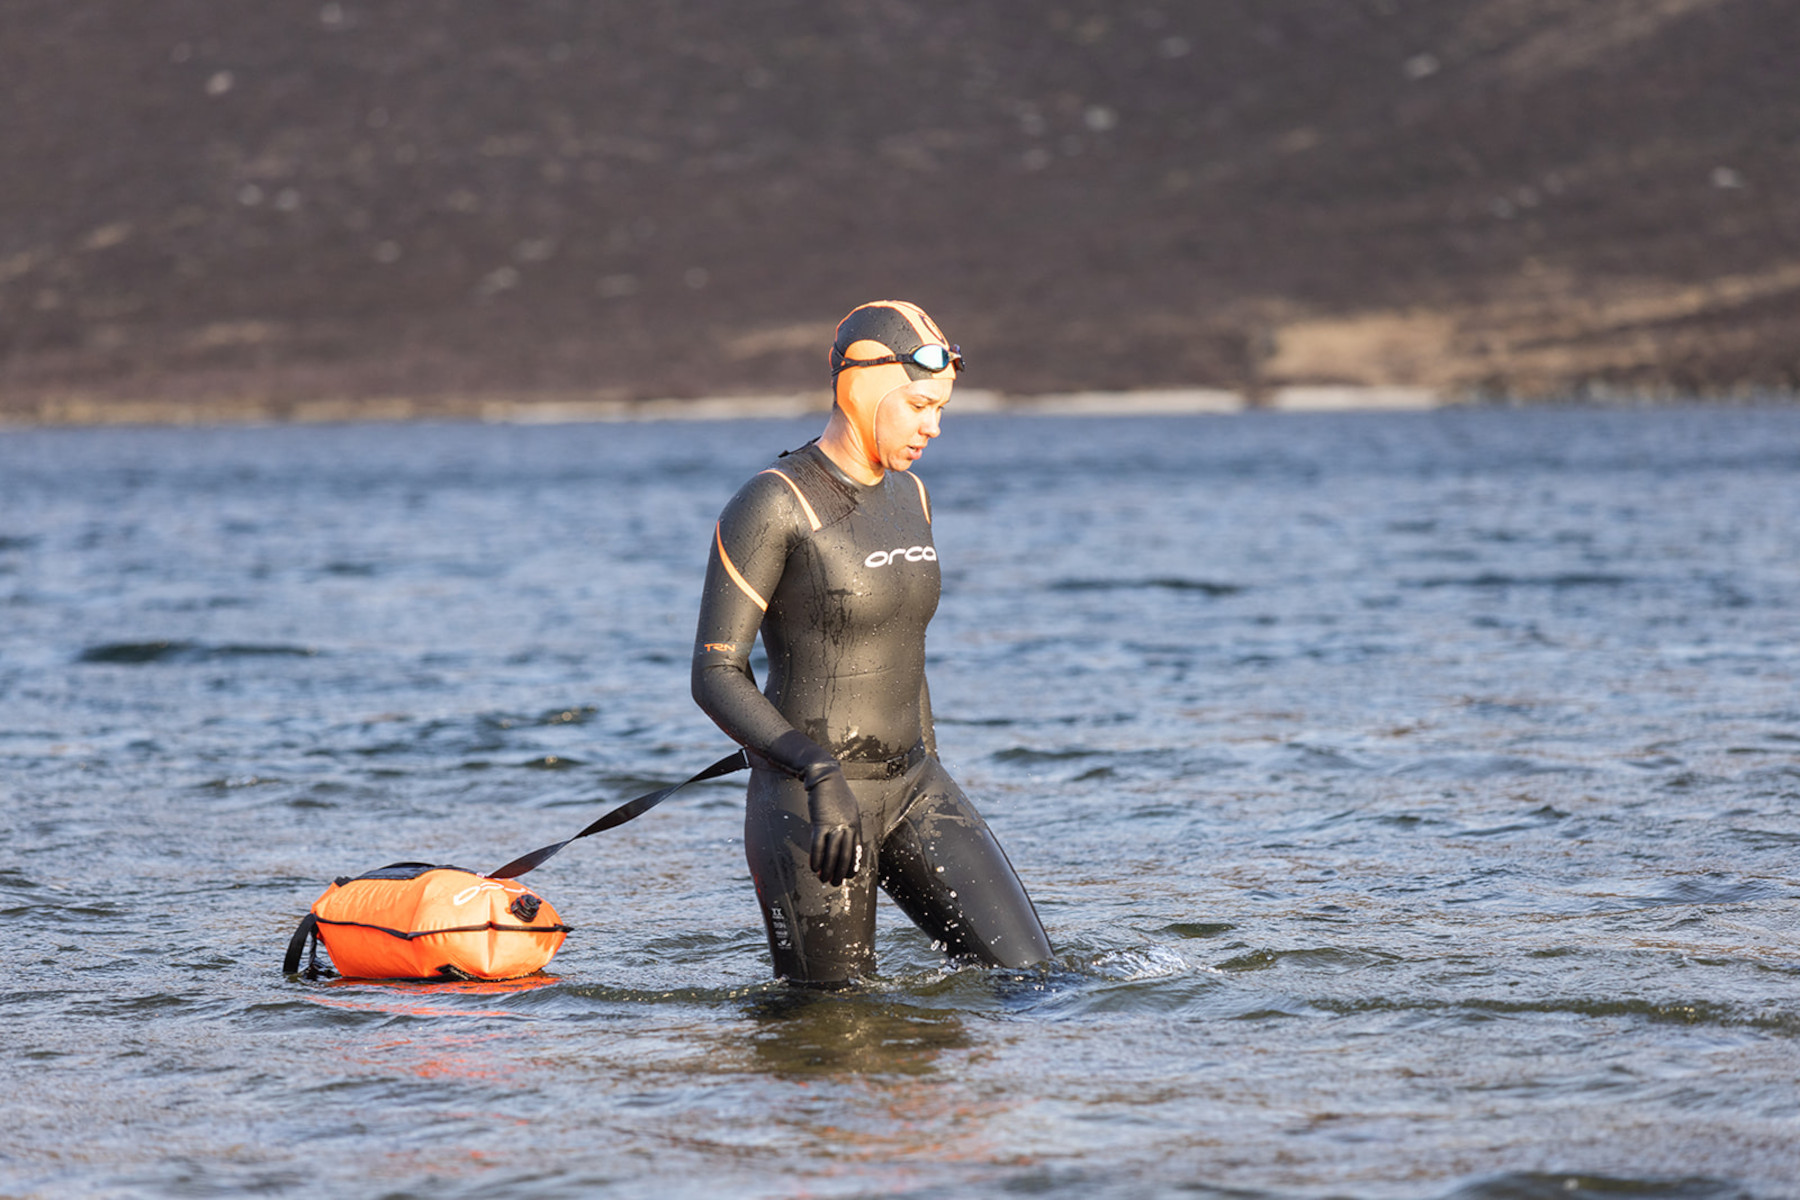 OrcaWetsuit